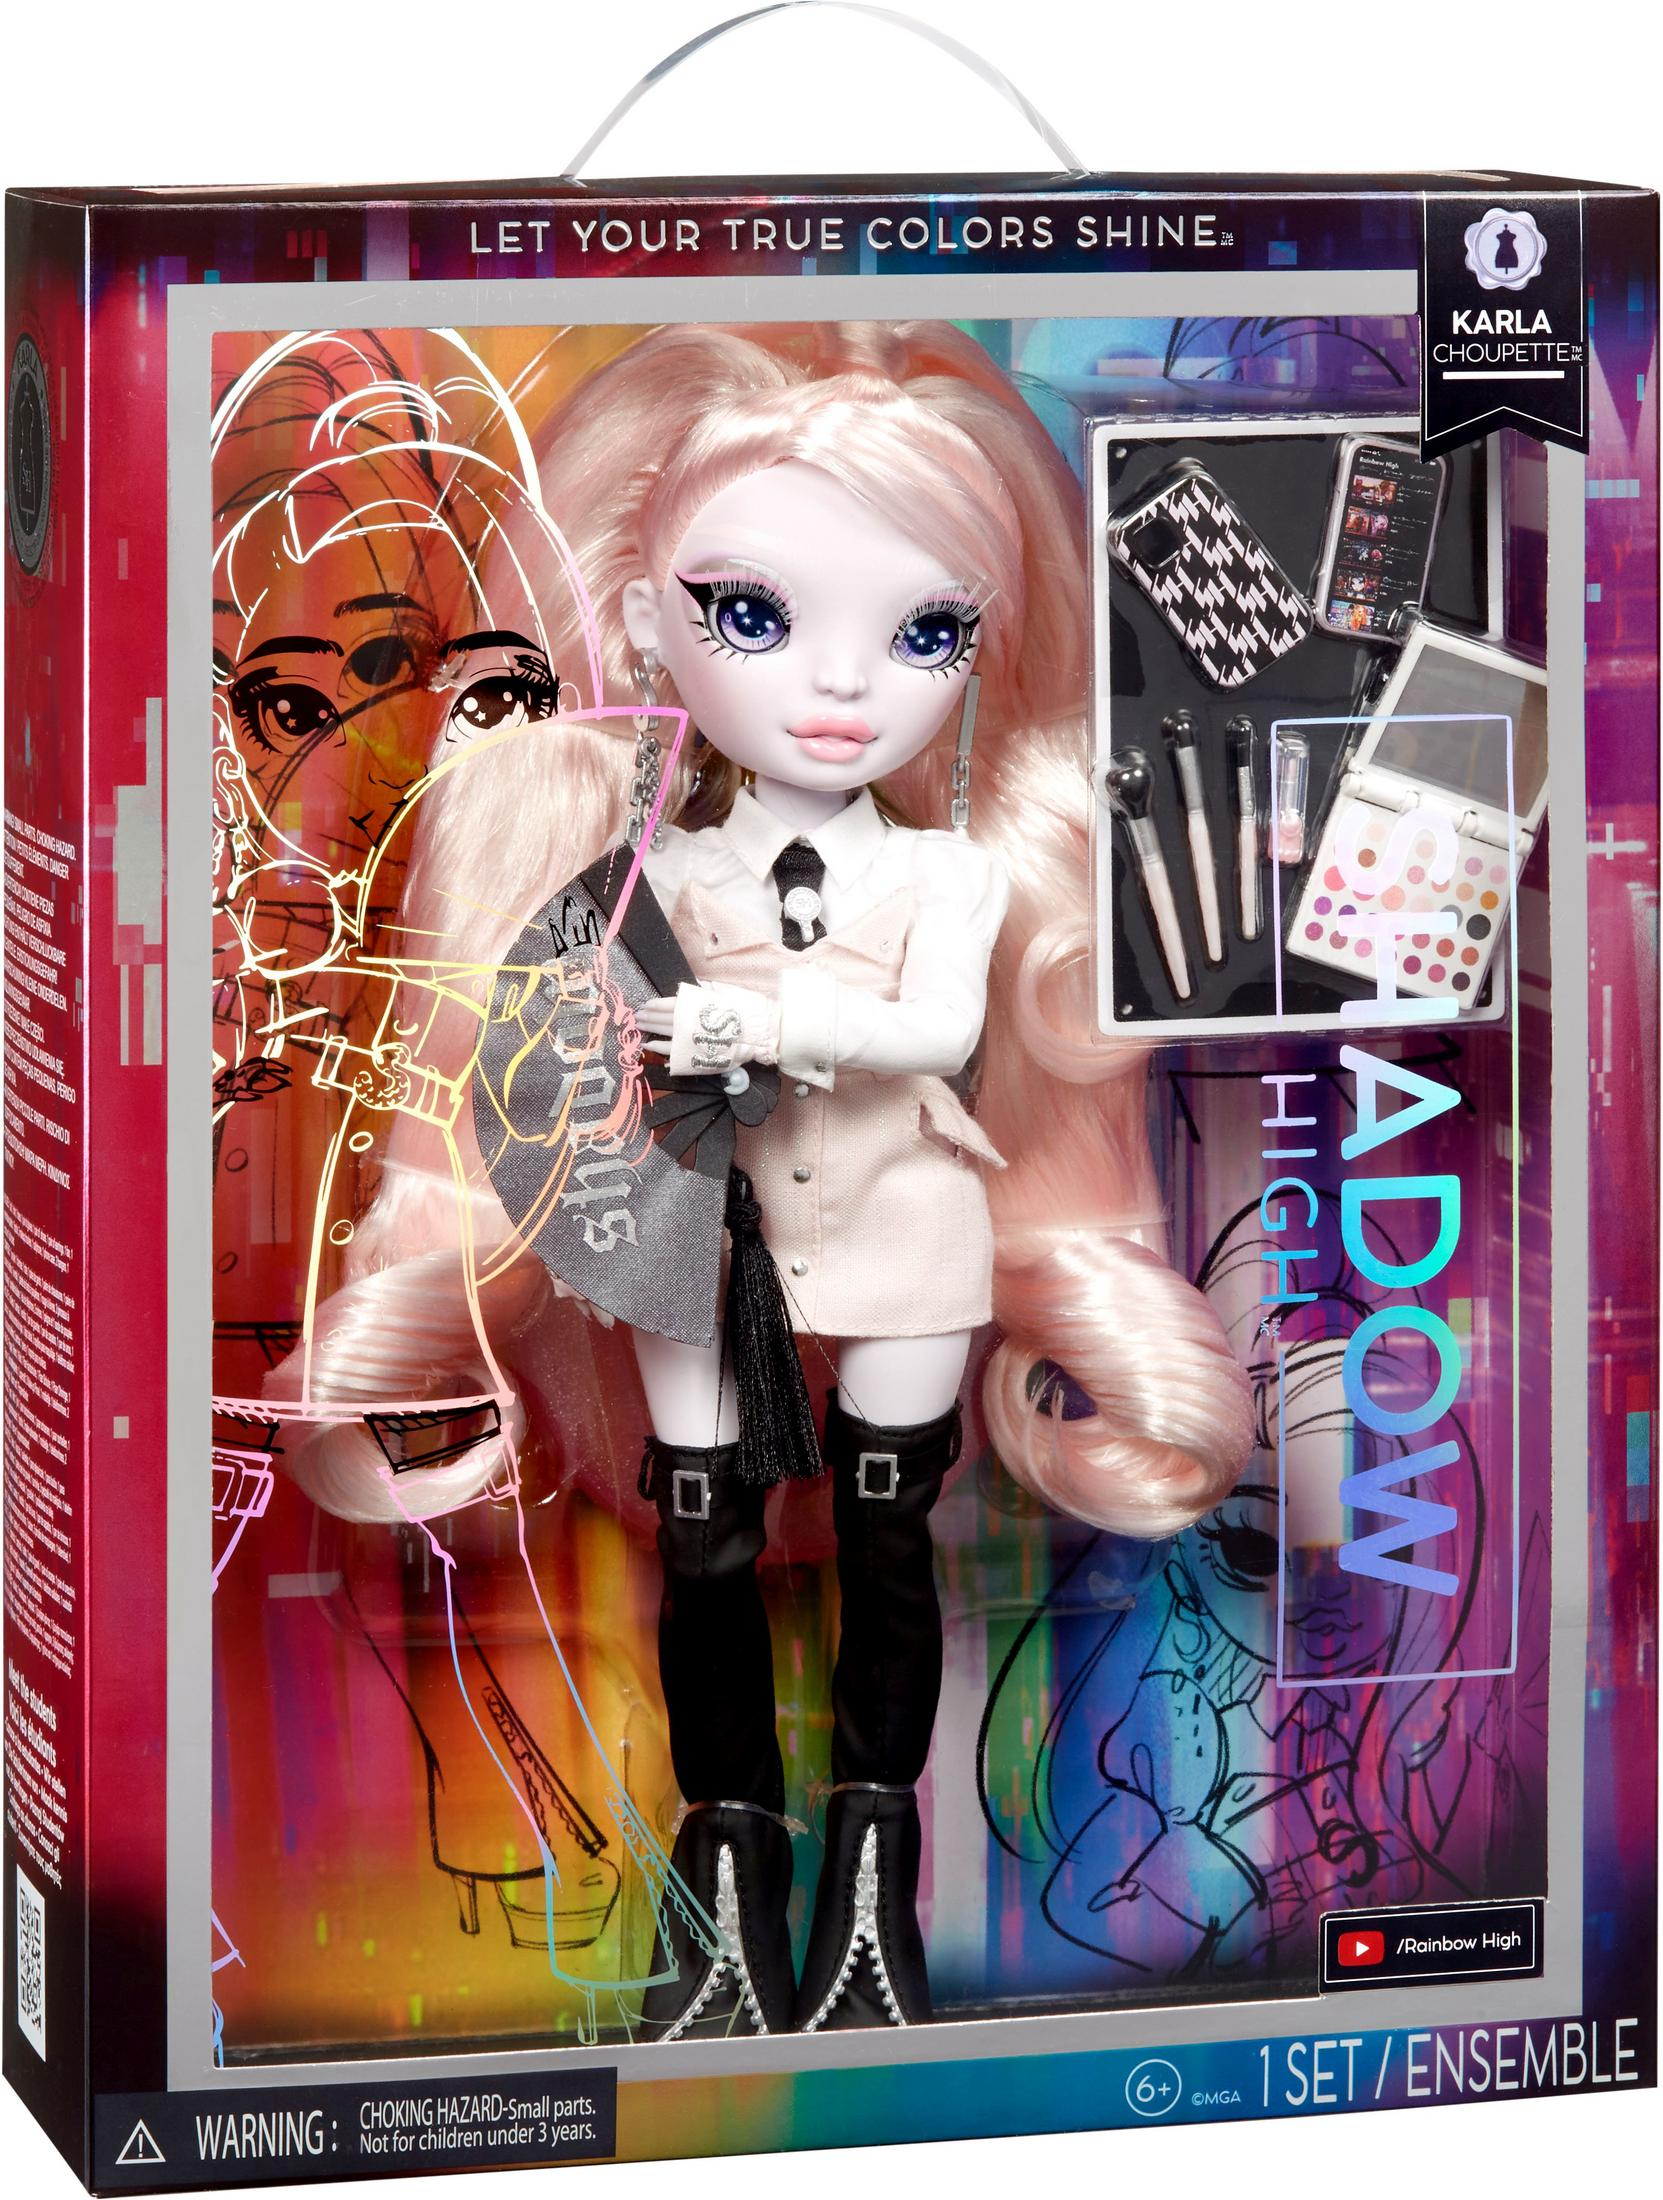 ENTERTAINMENT MGA Rosa 583042 FASHION Spielzeugpuppe 8X26.5G CARAMEL (PINK) HIGH DOLL-IP